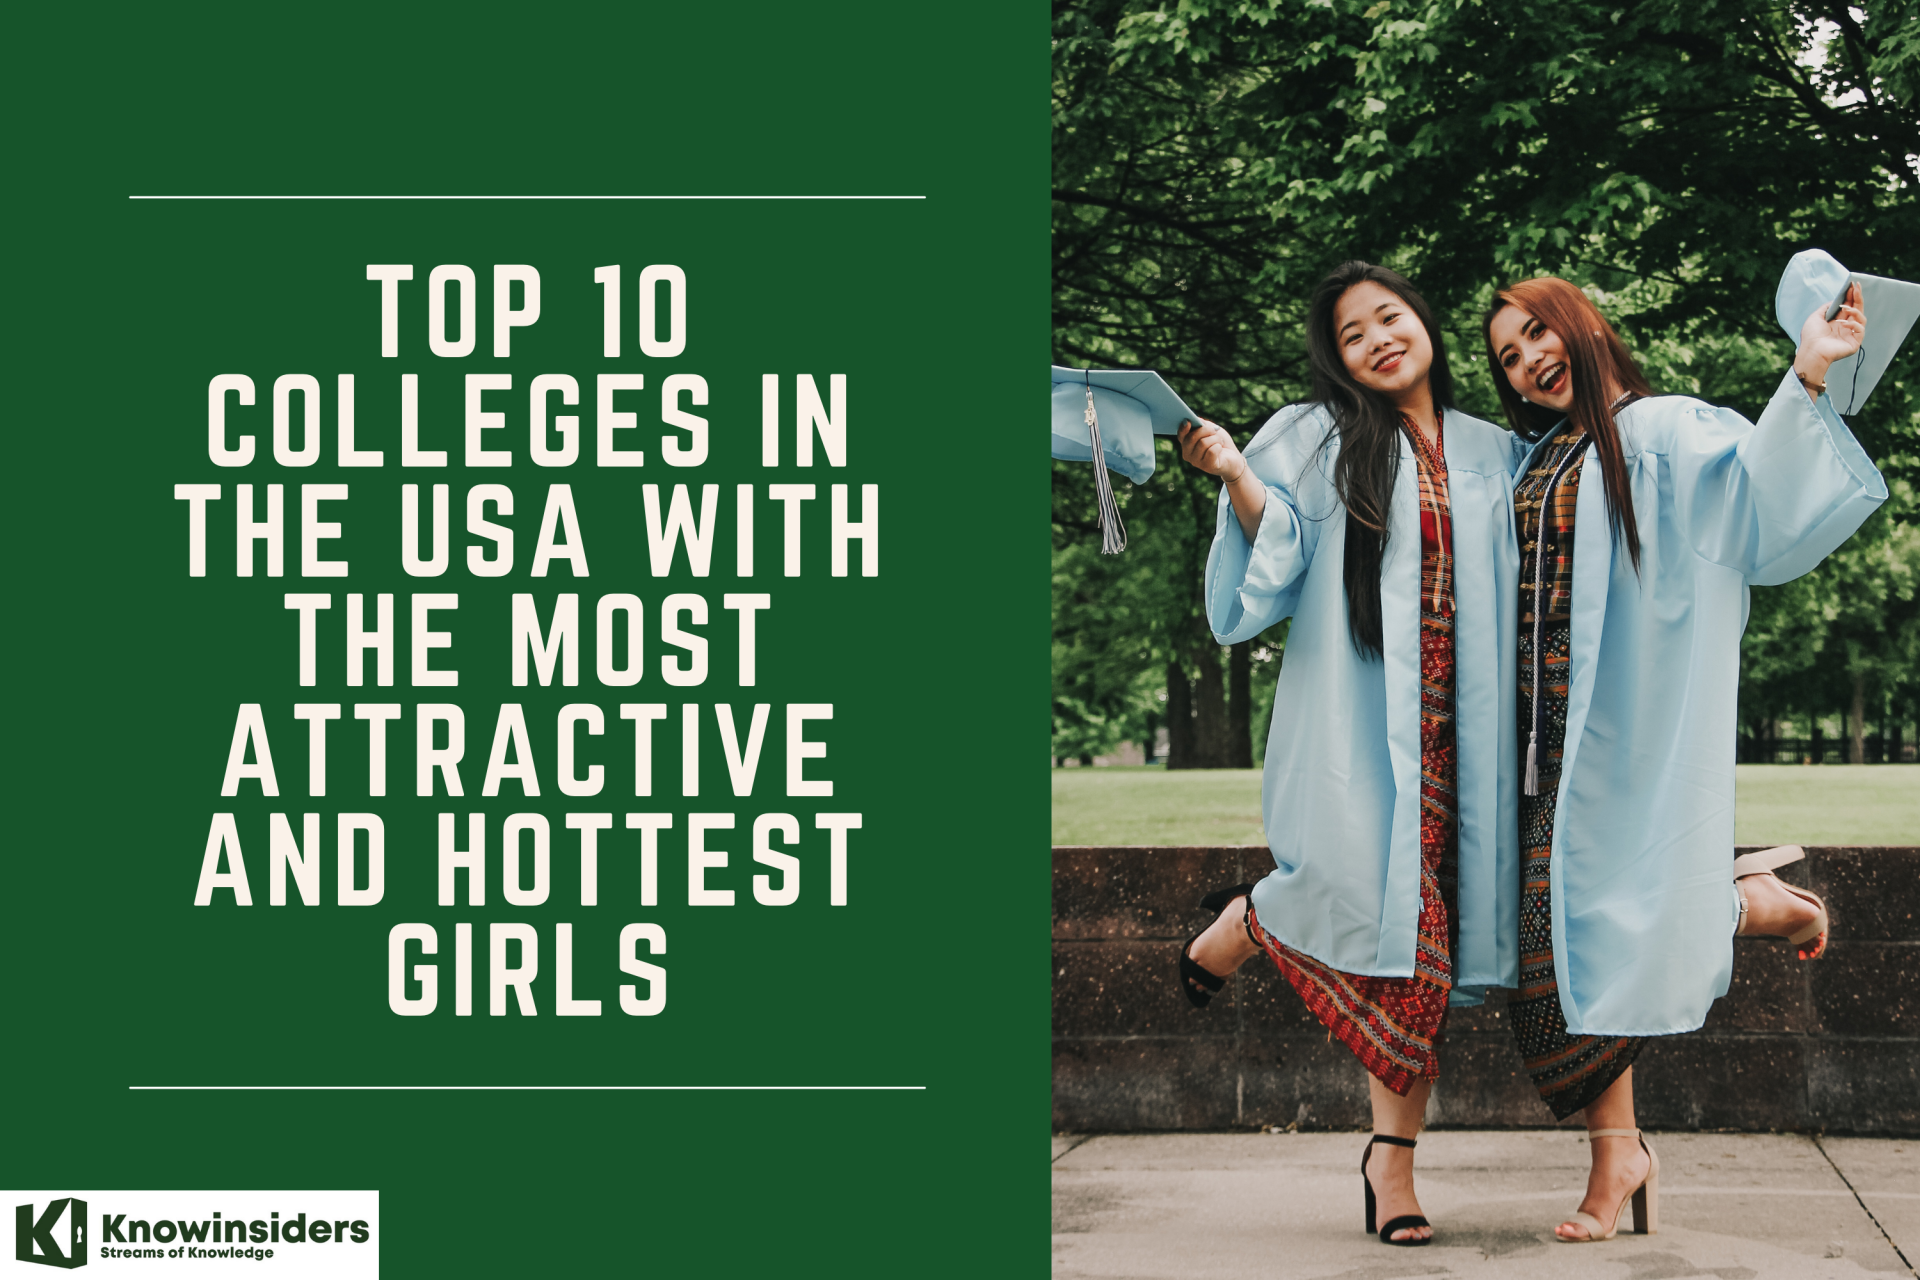 Top 10 Colleges in the USA With the Most Beautiful Girls